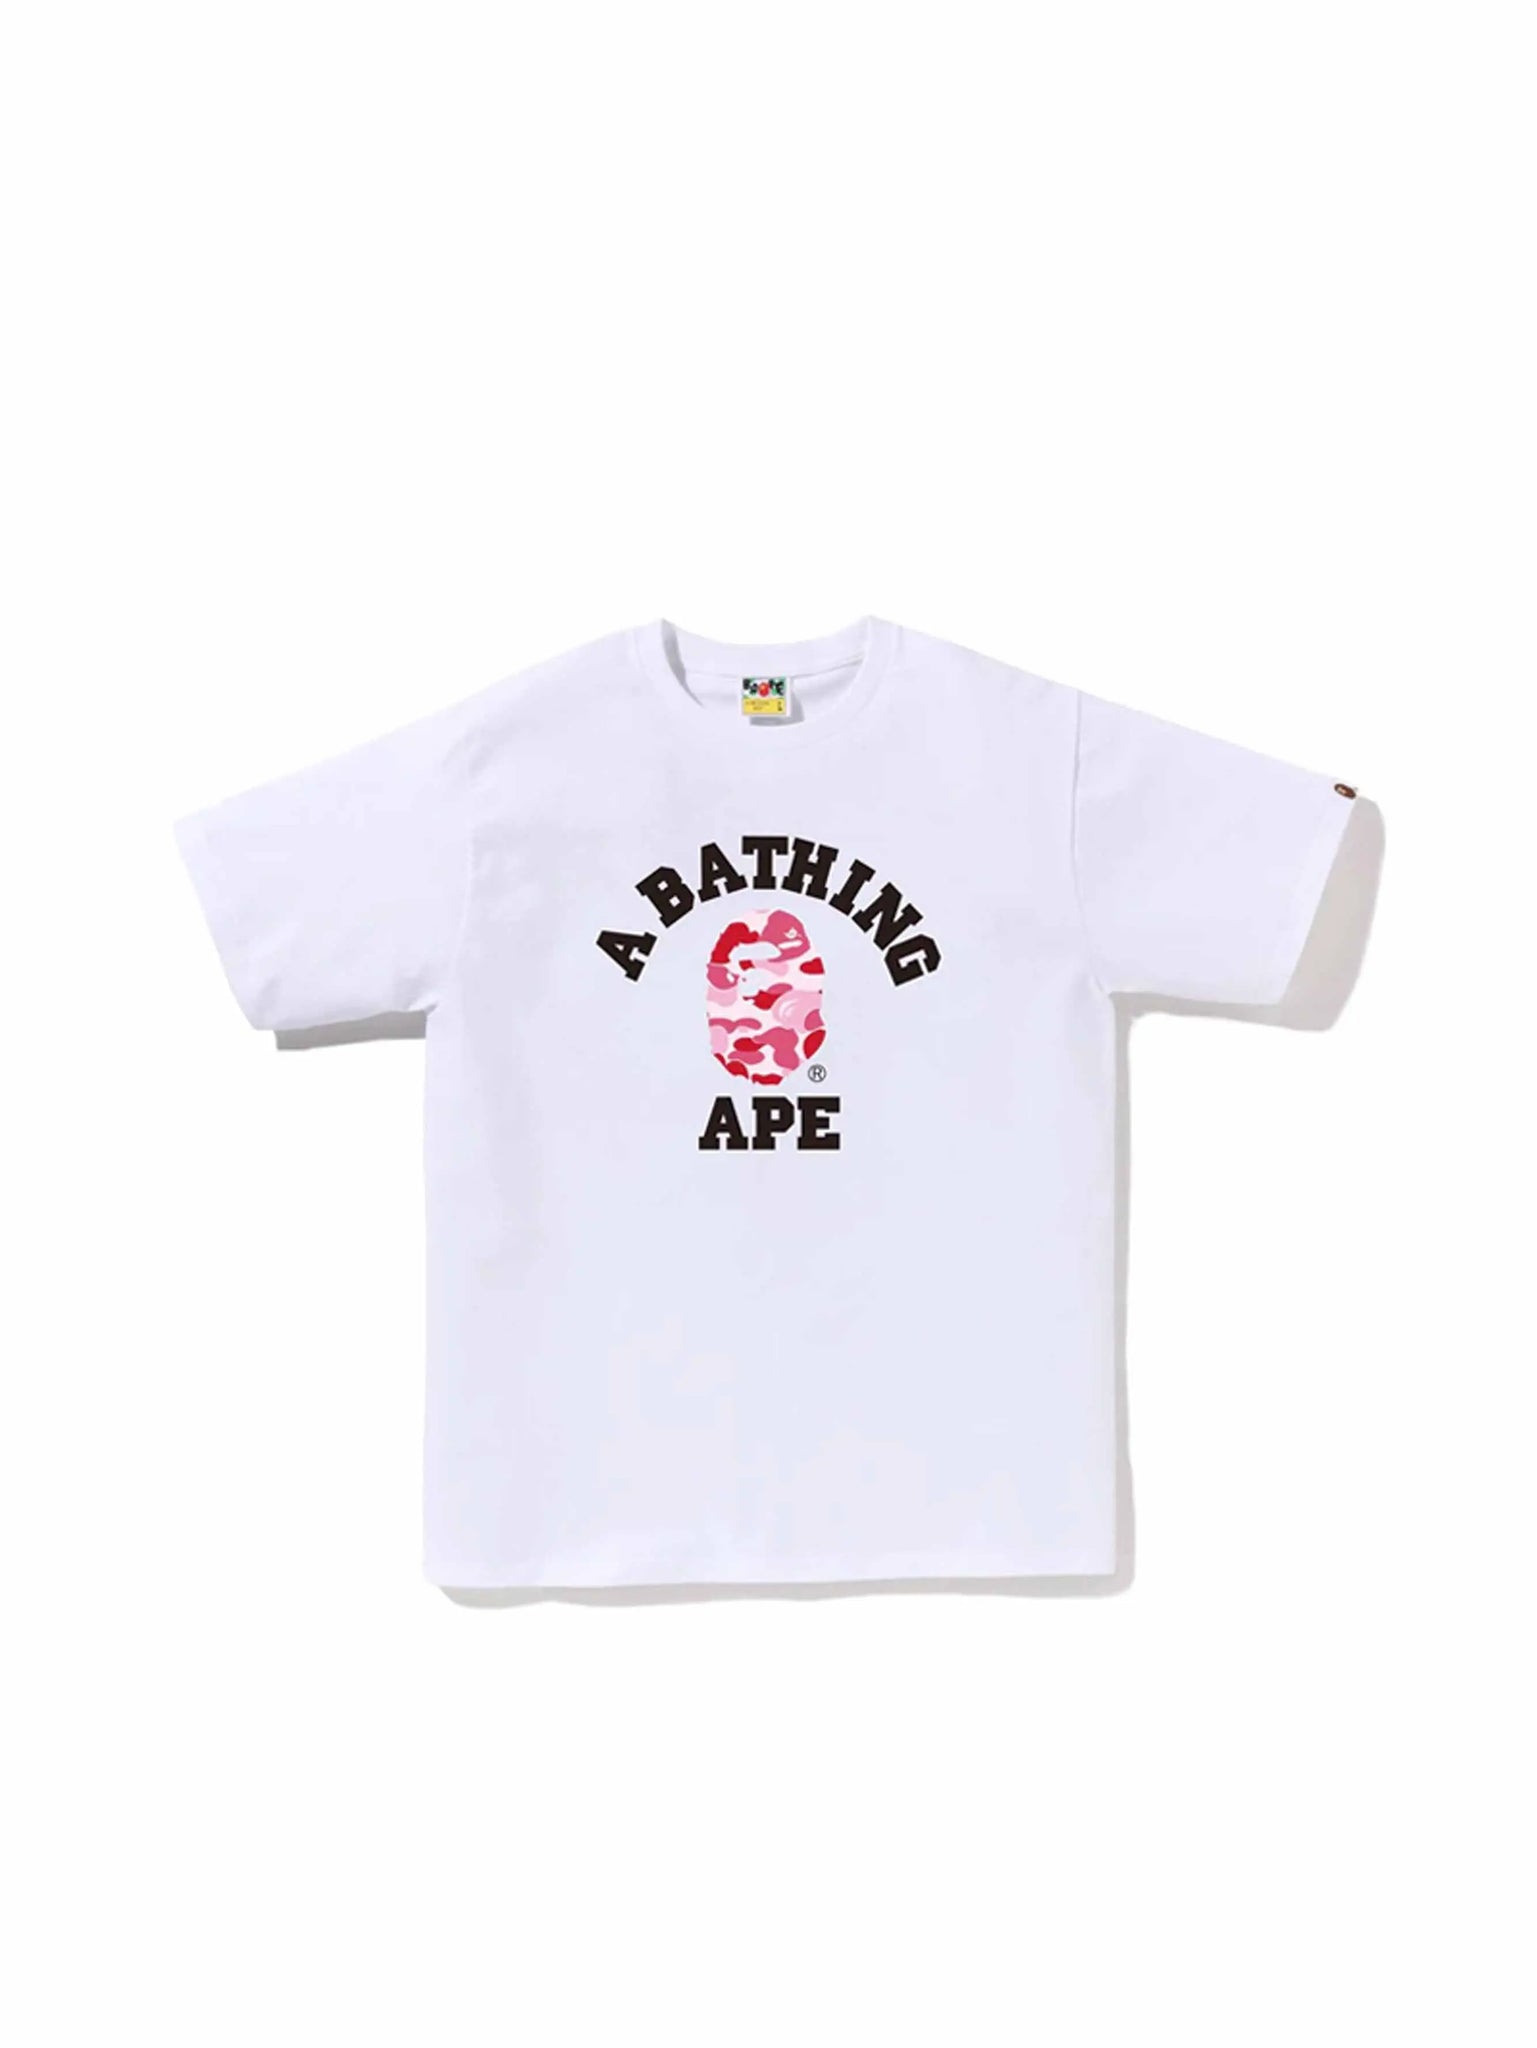 A Bathing Ape ABC Camo College Tee (SS23) White/Pink in Auckland, New Zealand - Shop name